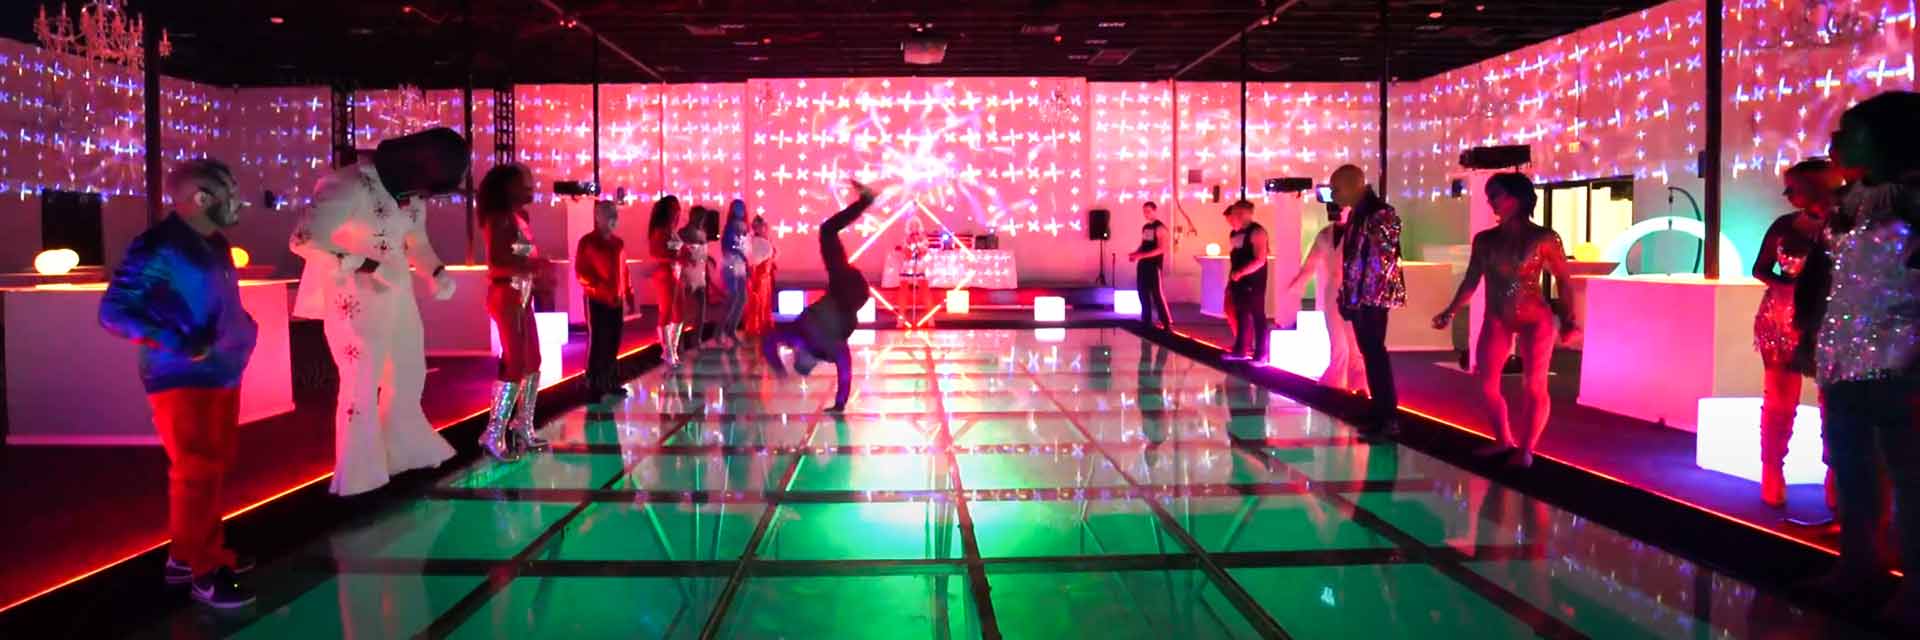 Immersive dance floor at Mansion 54, League of Legends 360 projection event